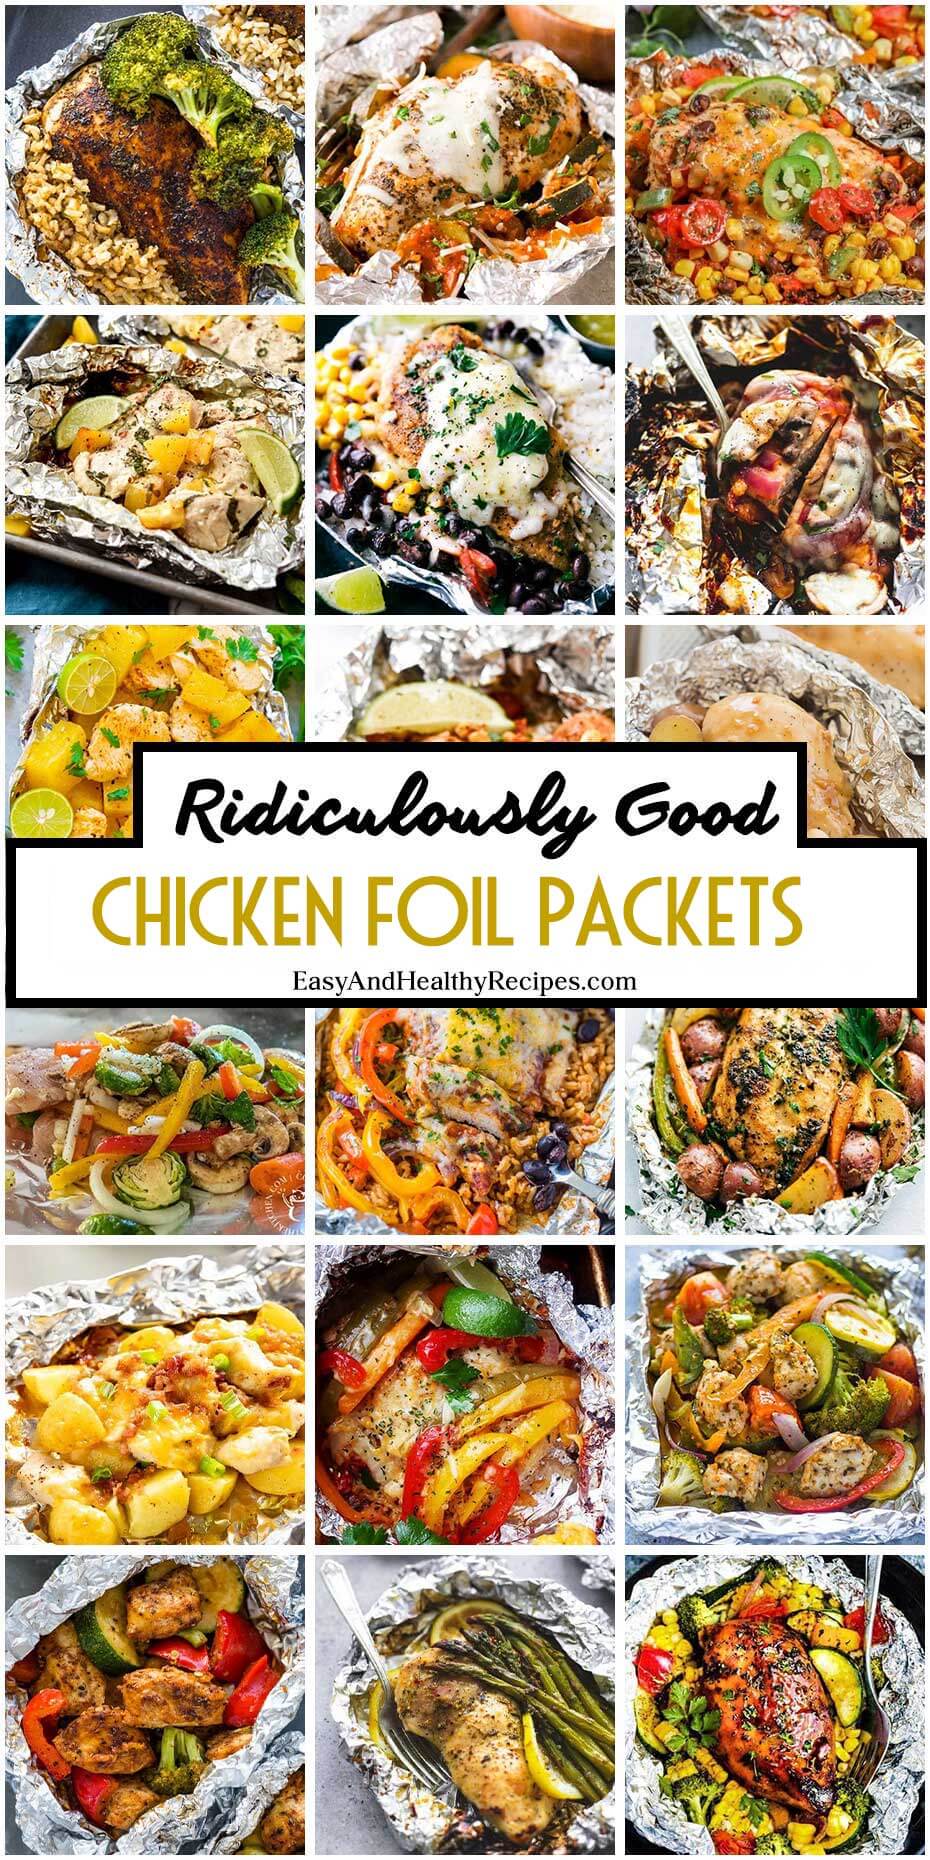 30 Ridiculously Delicious Chicken Foil Packets